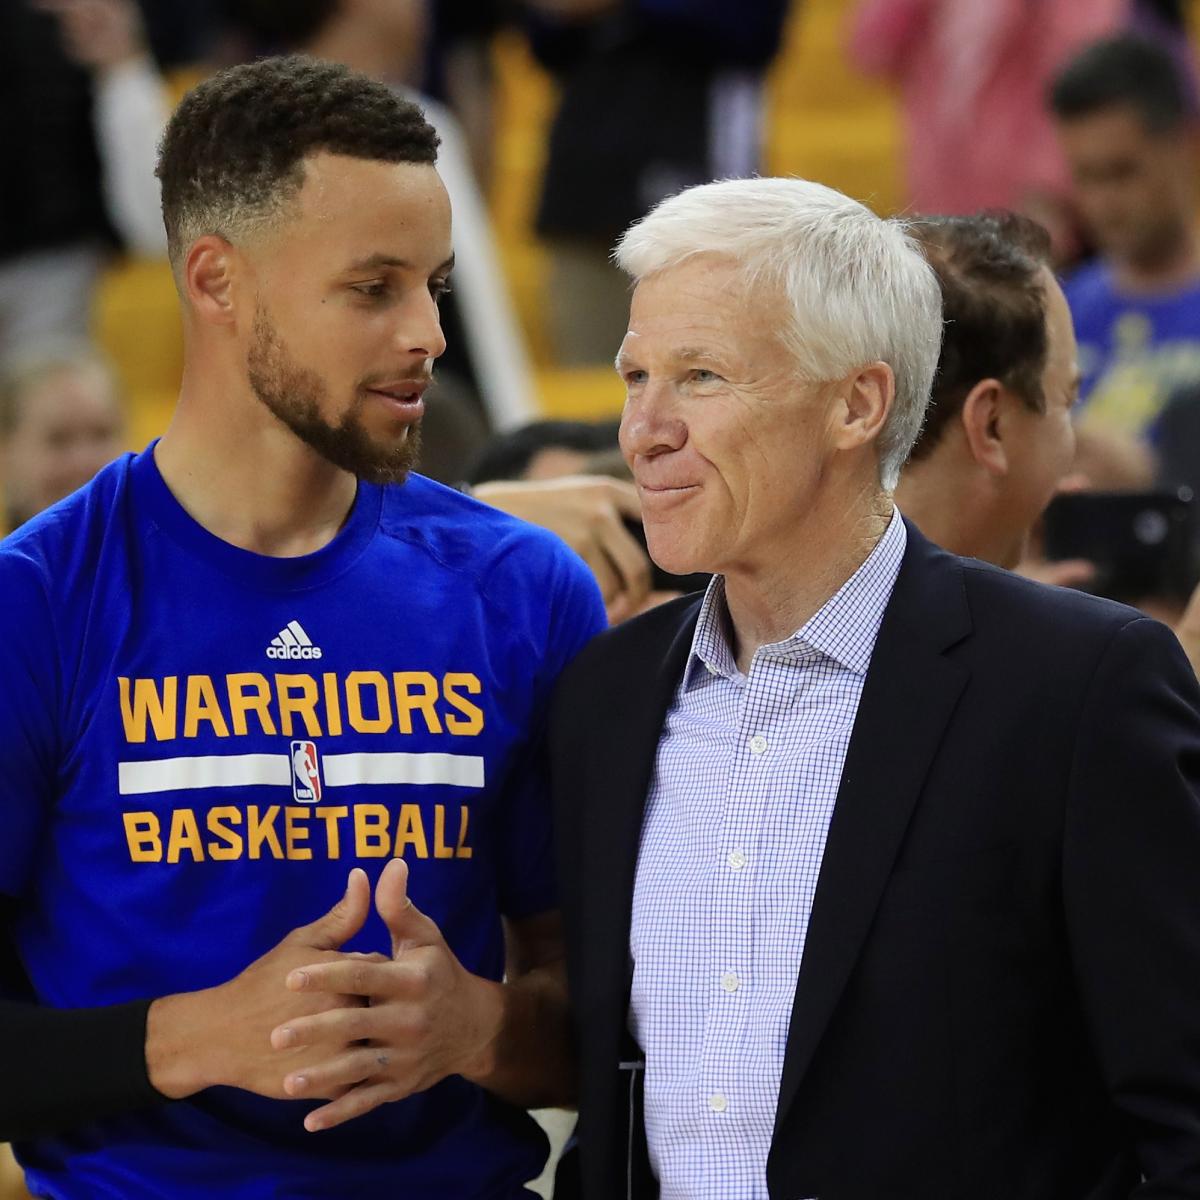 Davidson to retire Stephen Curry's number